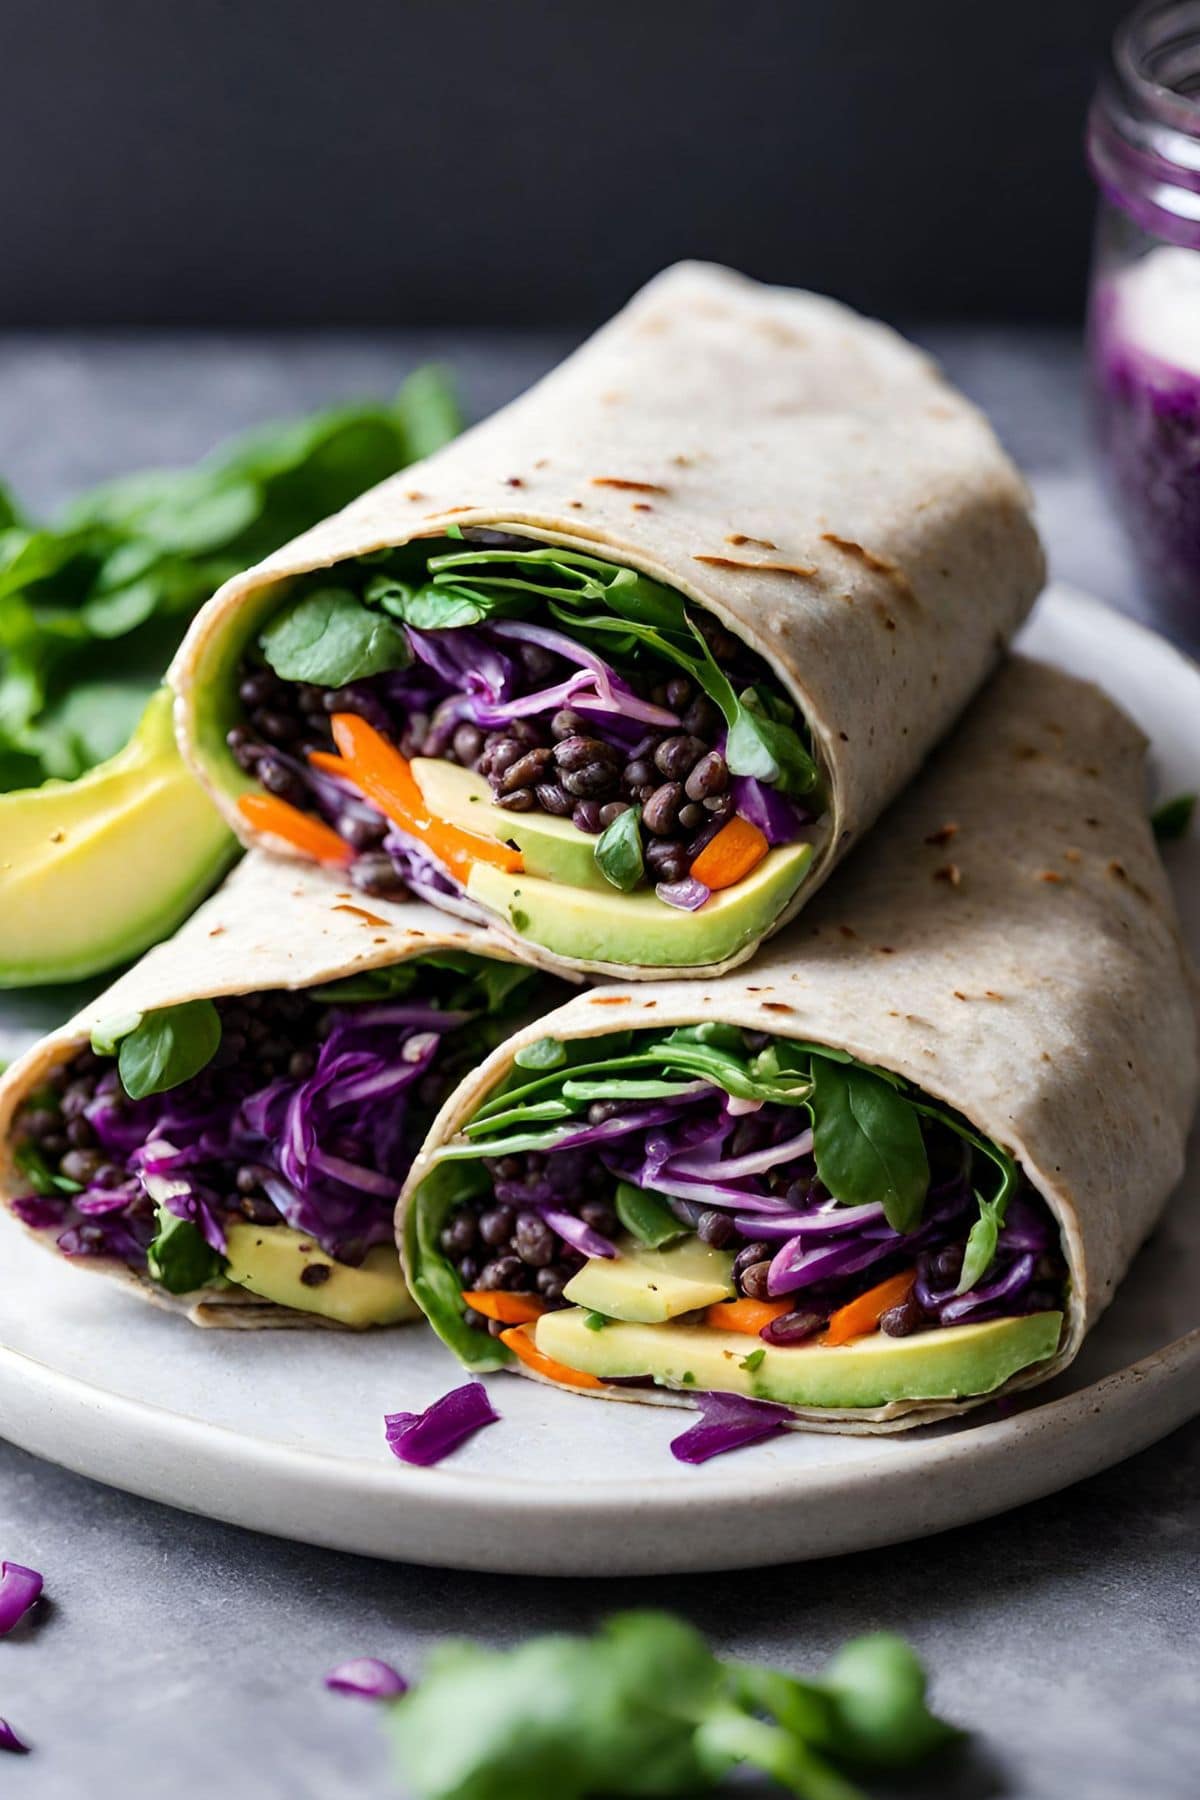 A quick and easy Lentil Wrap with avocado, carrots, cabbage, and the tastiest Sriracha Tahini Sauce. Healthy, nourishing, vegan and delicious!